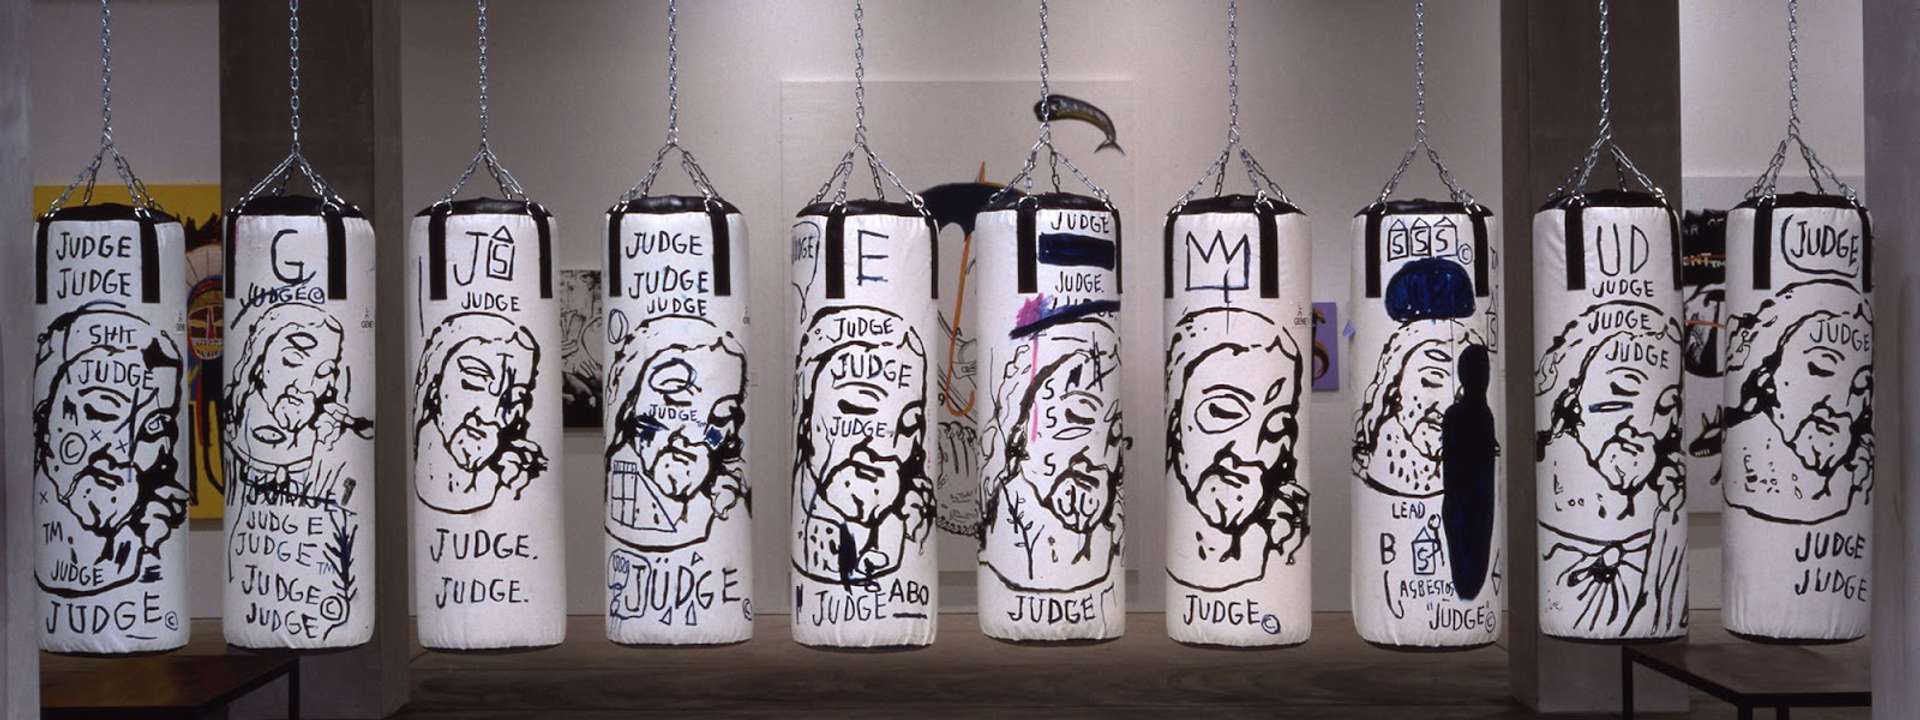 The artwork Ten Punching Bags by artists Jean-Michel Basquiat and Andy Warhol, showing ten white punching bags hanging from the ceiling. In each, a Renaissance-like depiction of Jesus is painted, and graffitied over by Basquiat with the word “Judge”.